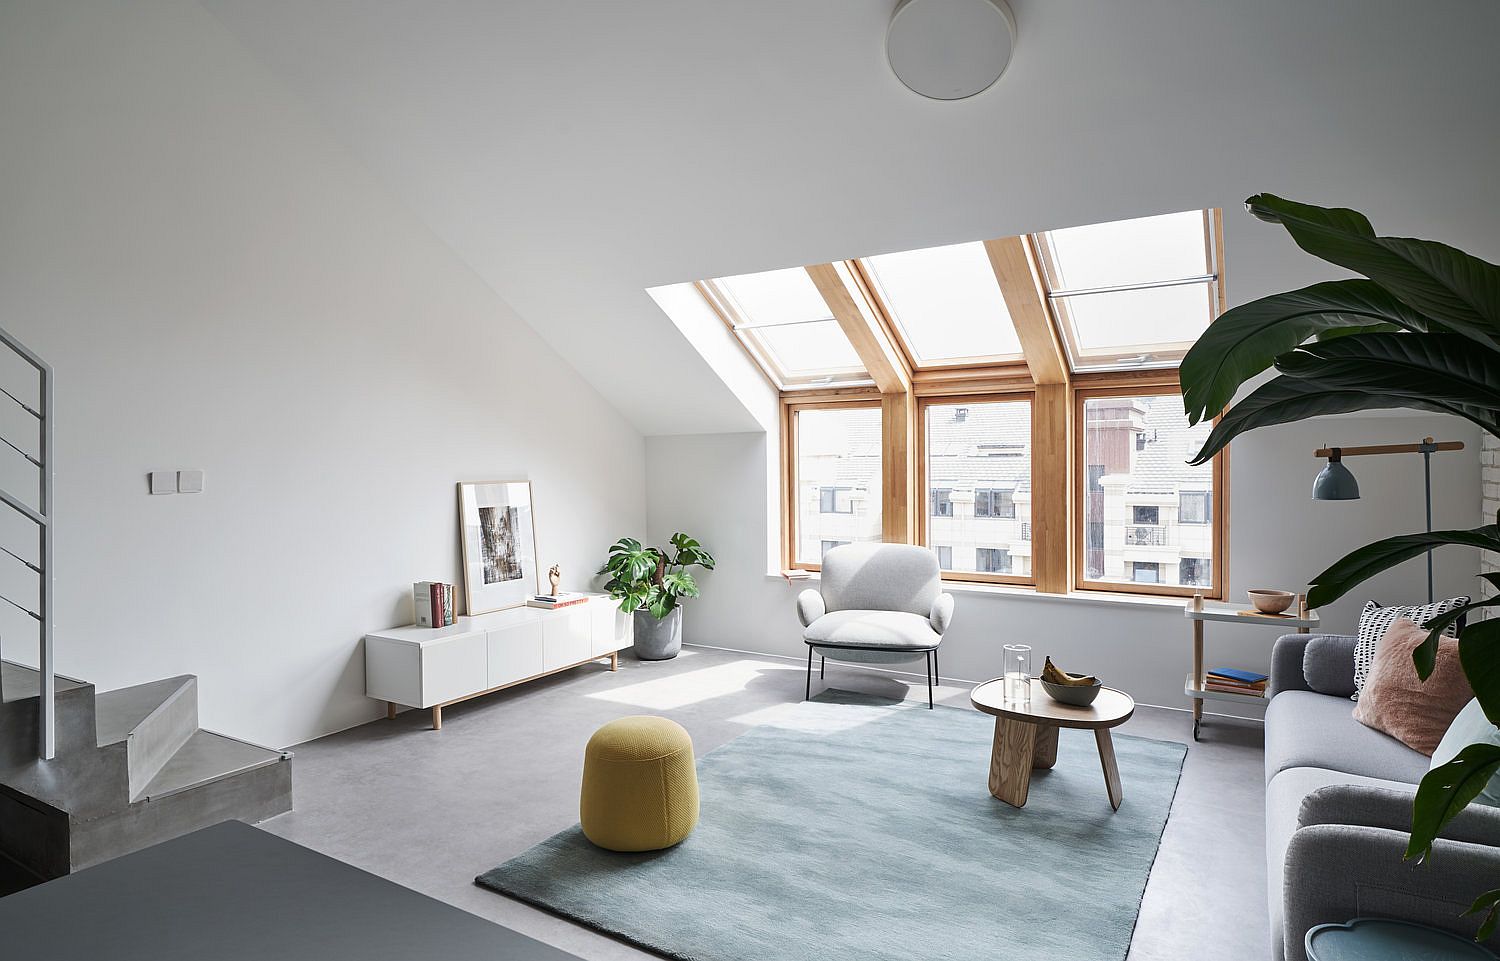 Minimal living room has a Scandinavian style about it